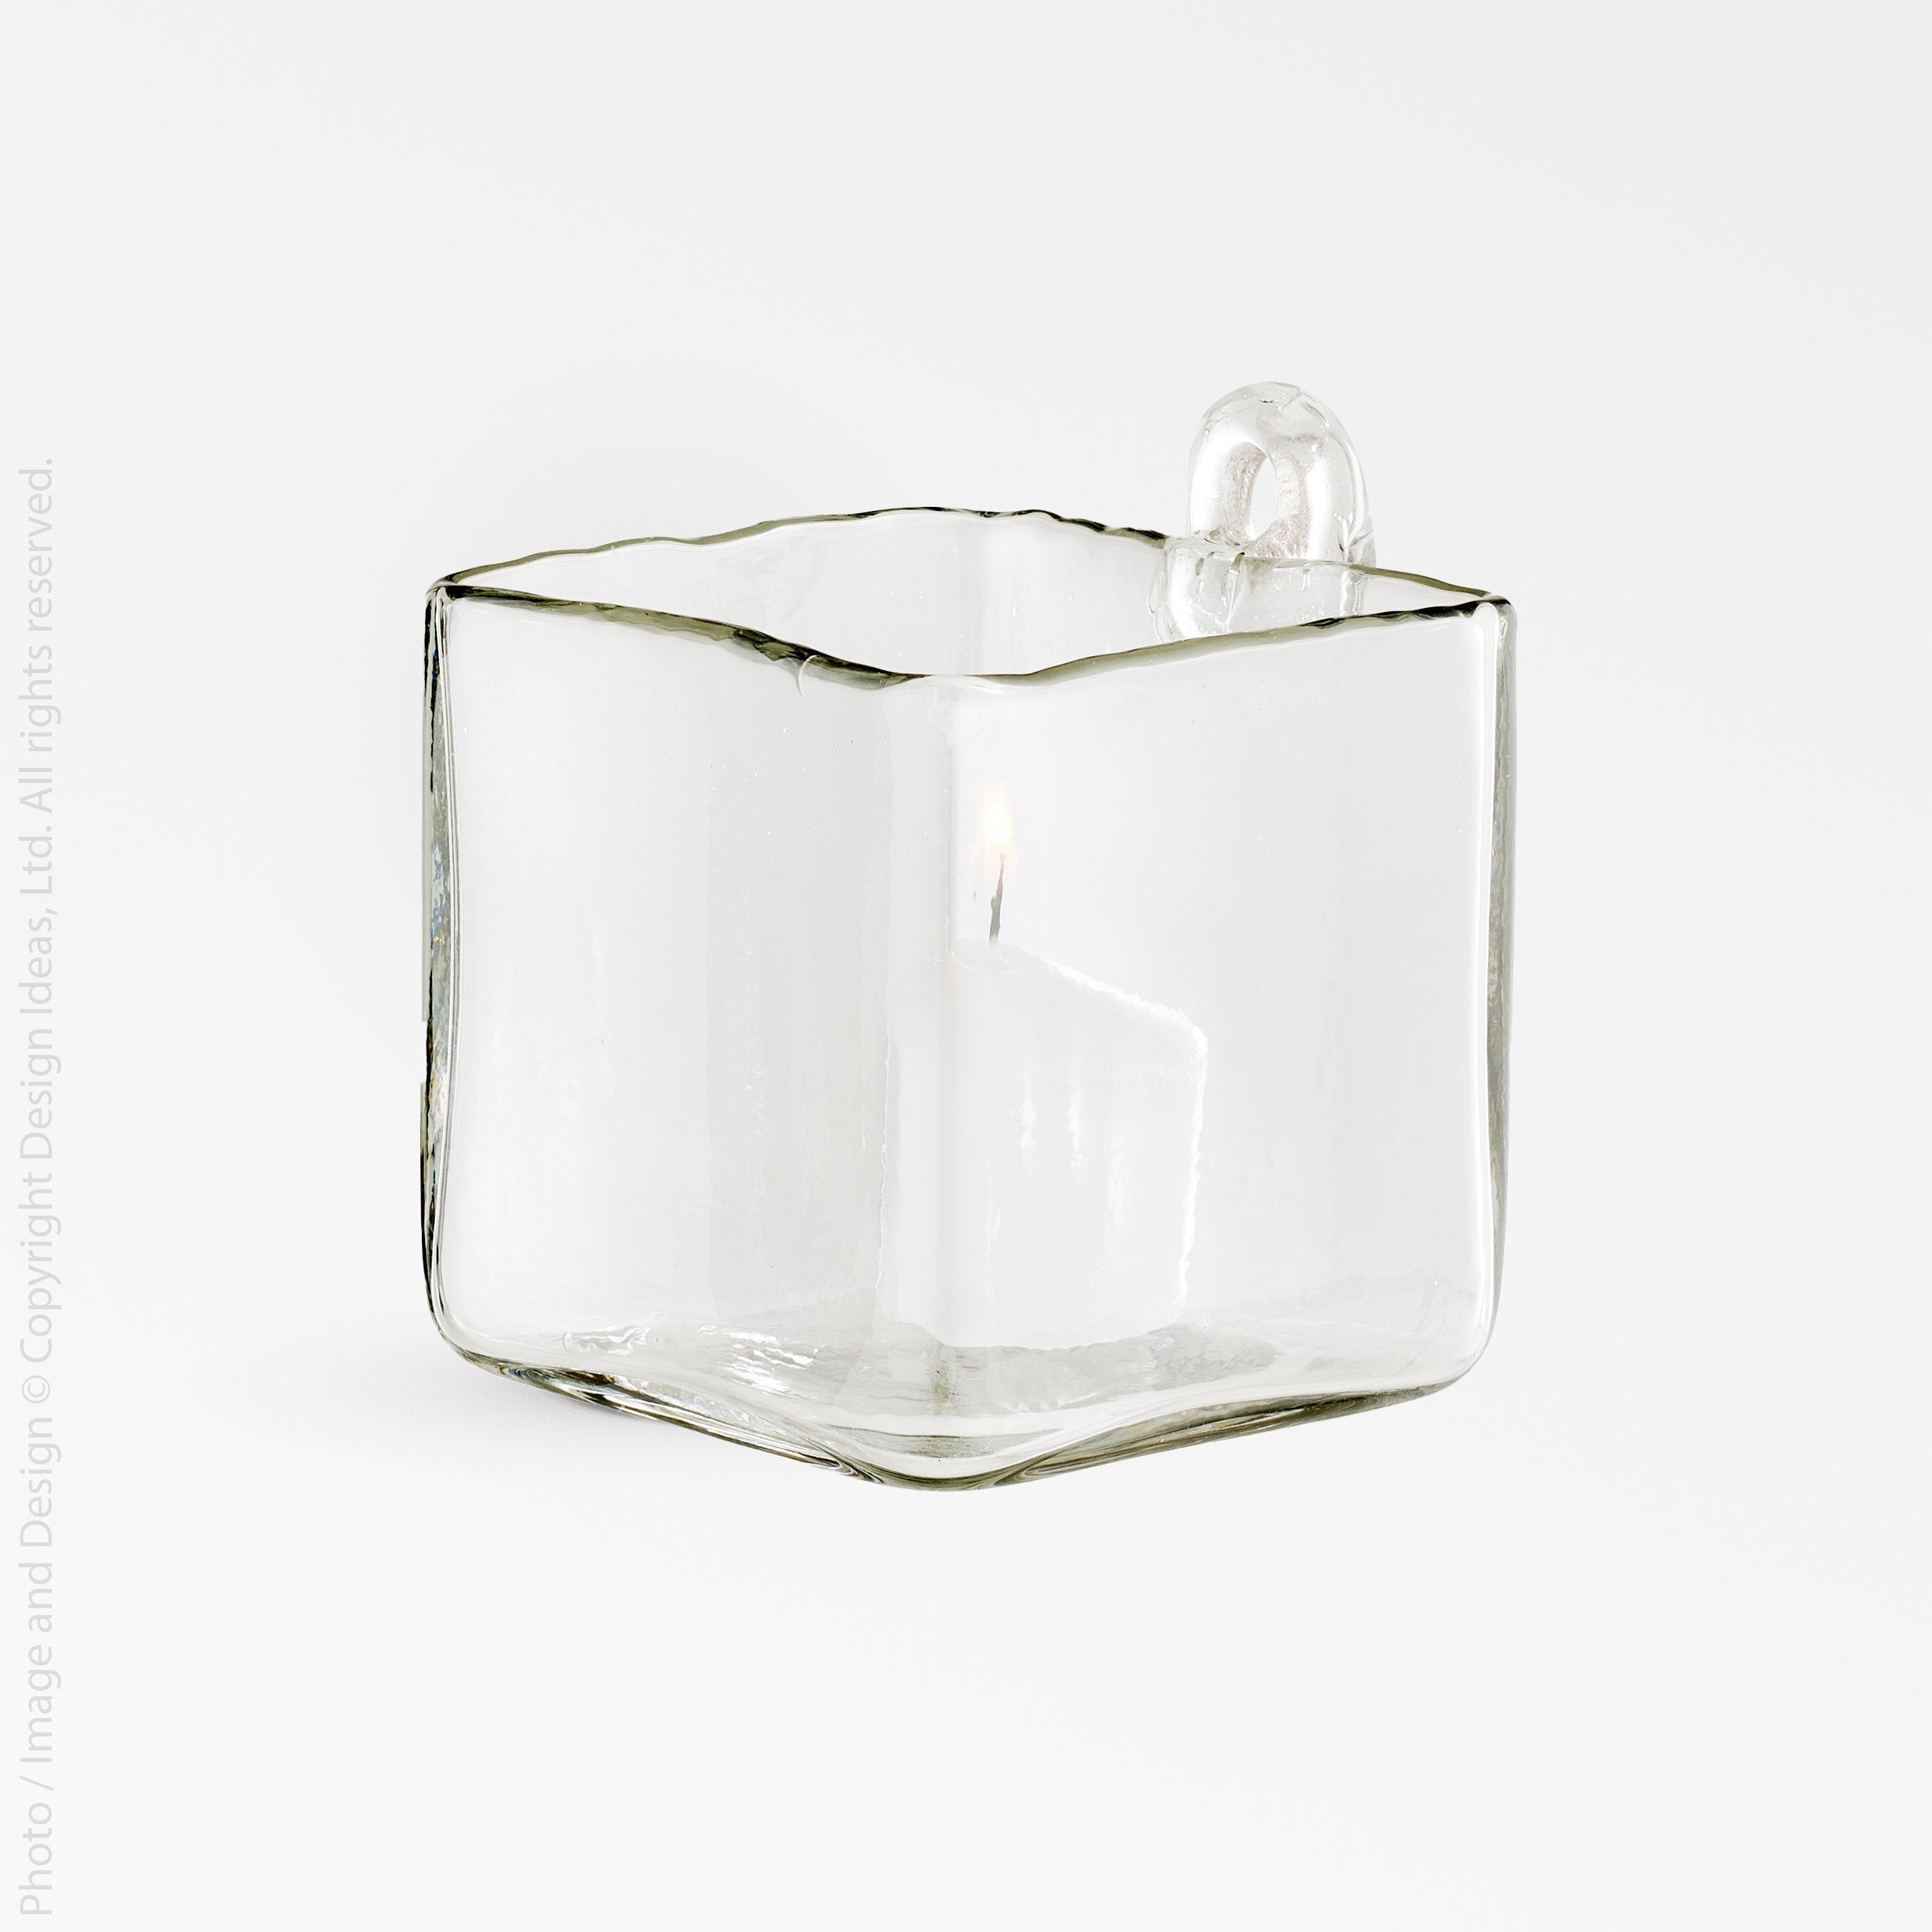 Bowery Glass Candle Holder - Clear Color | Image 1 | From the Bowery Collection | Elegantly made with natural glass for long lasting use | Available in clear color | texxture home